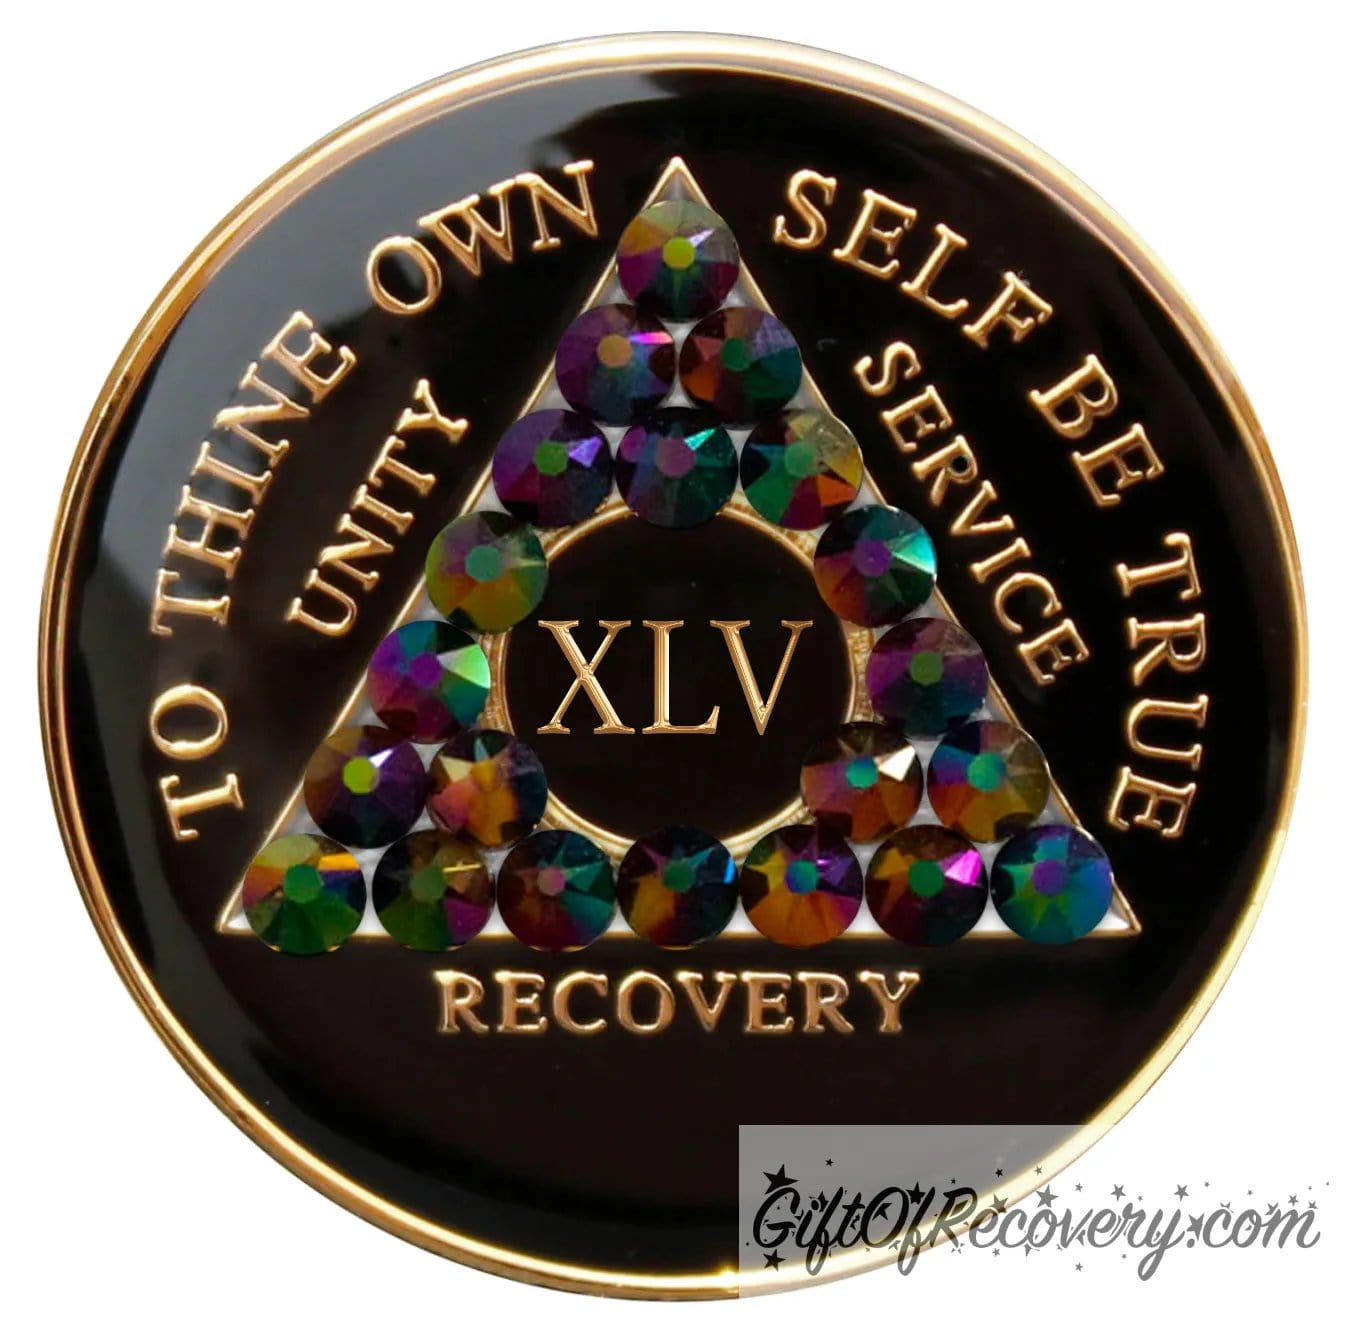 45 year black onyx AA recovery medallion, with 21 genuine peacock crystals, symbolizing the beauty and diversity of recovery journeys, the AA medallion has; to thine own self be true, unity, service, recovery, roman numeral, and the rim, embossed with 14k gold and sealed with resin for a glossy finish.